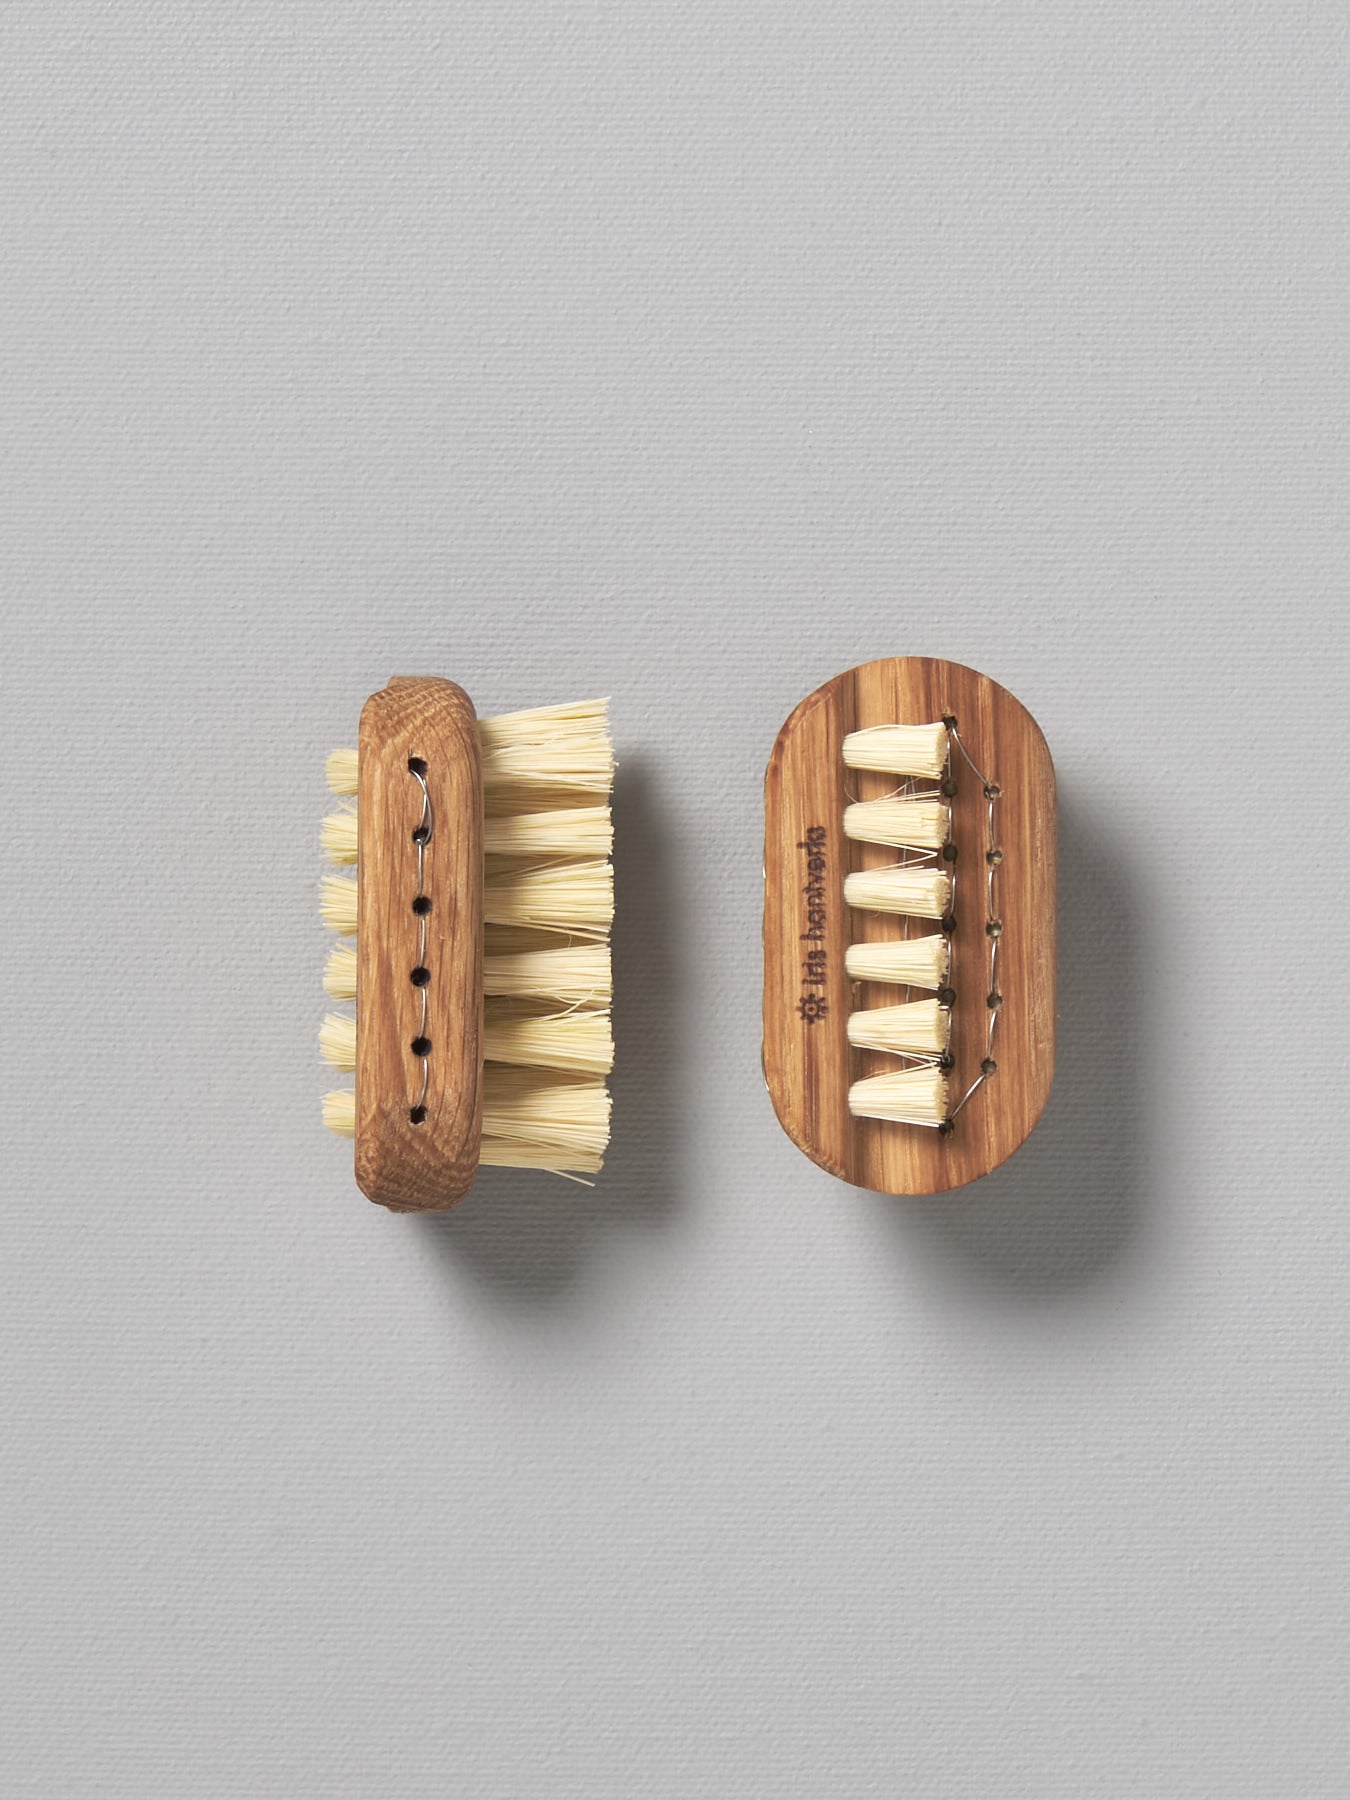 Two Iris Hantverk Nail Brushes - Small on a grey surface.